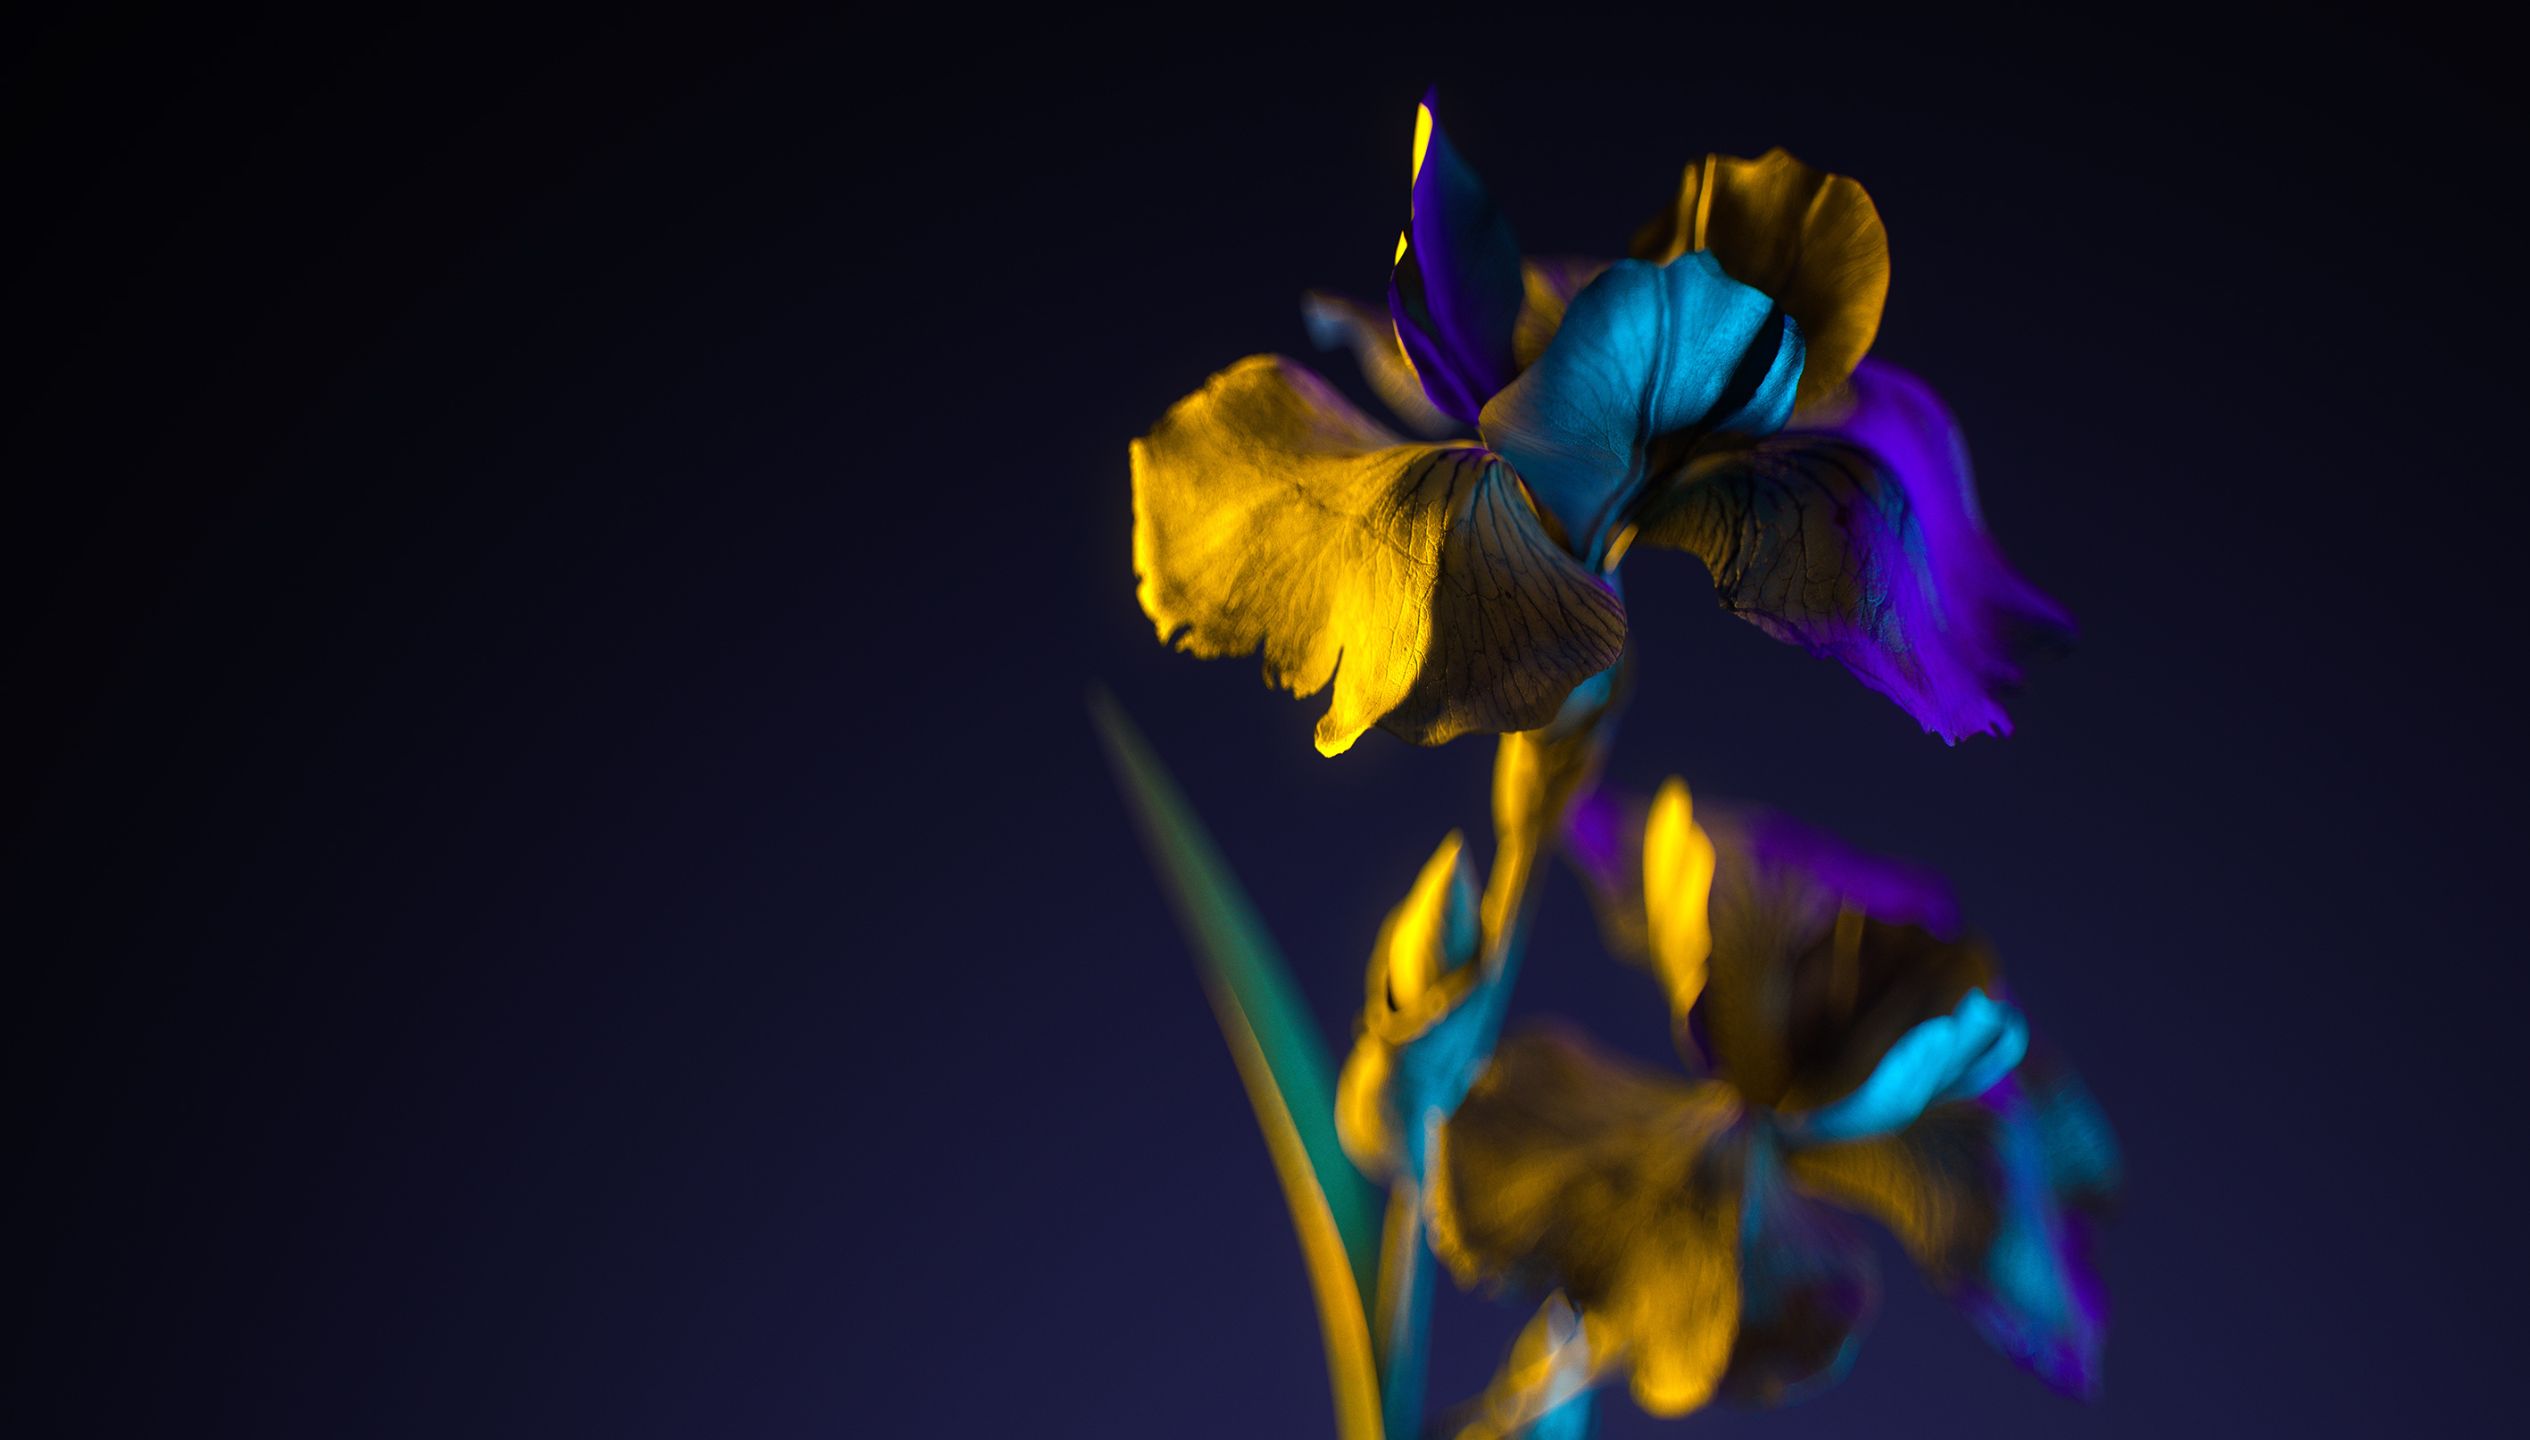 A close up of a flower with blue, purple and yellow petals, against a black background.